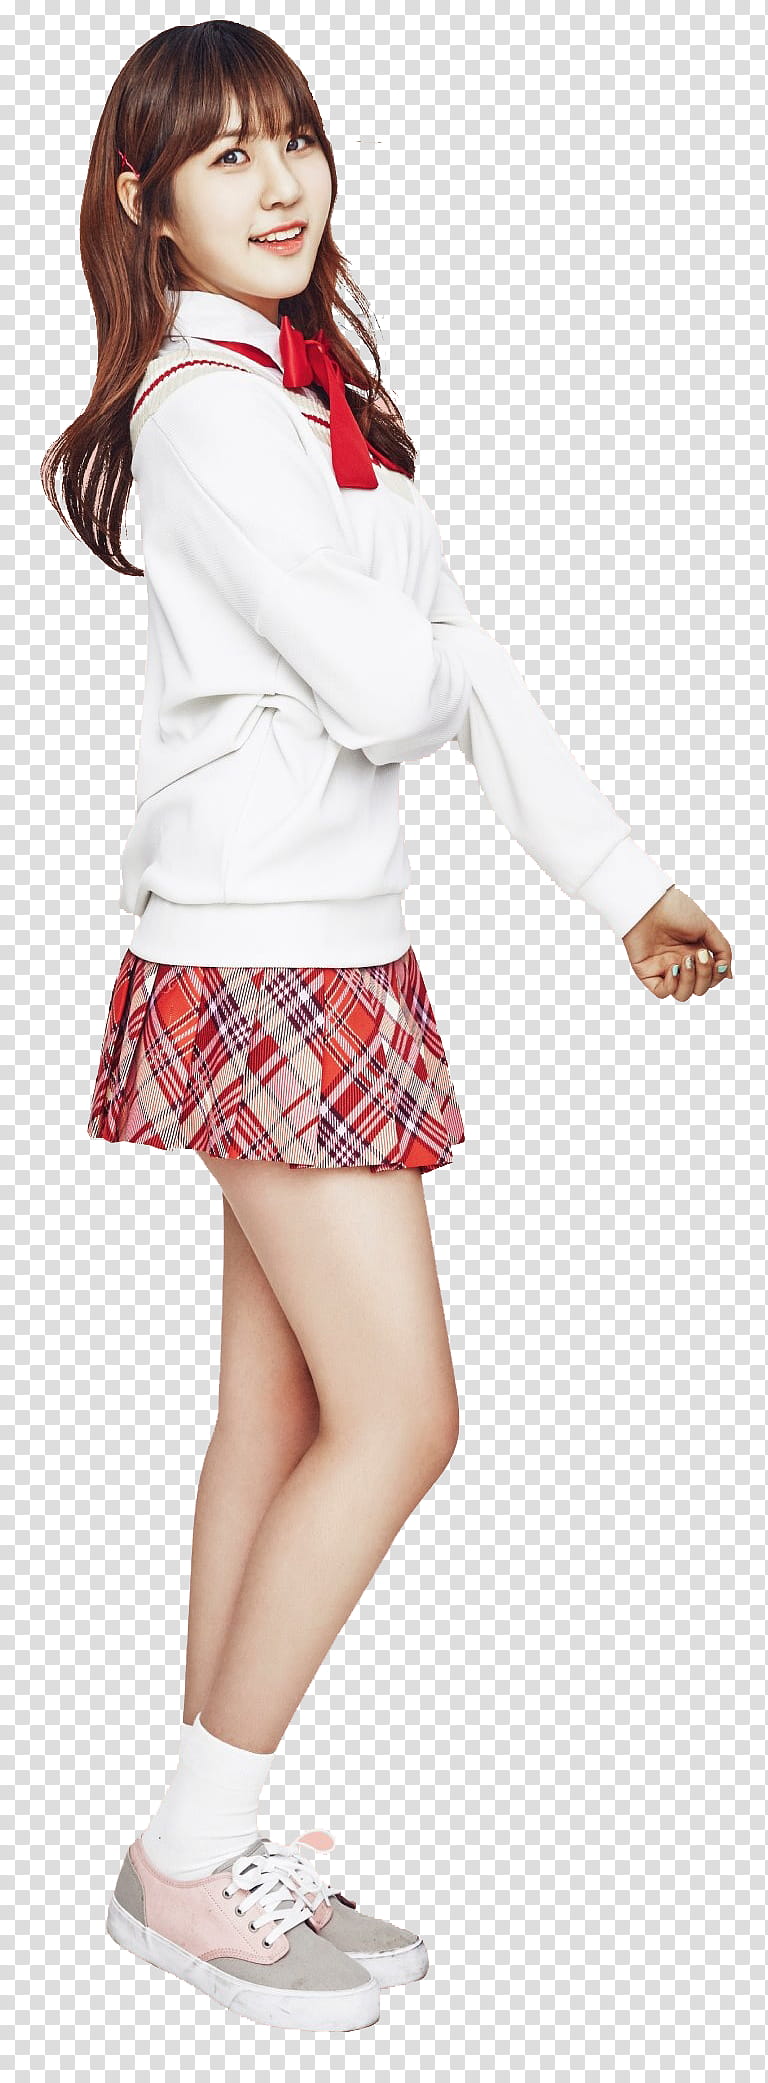 Pristin Pledis Girlz First Concert, woman wearing white long-sleeved top and red skirt transparent background PNG clipart